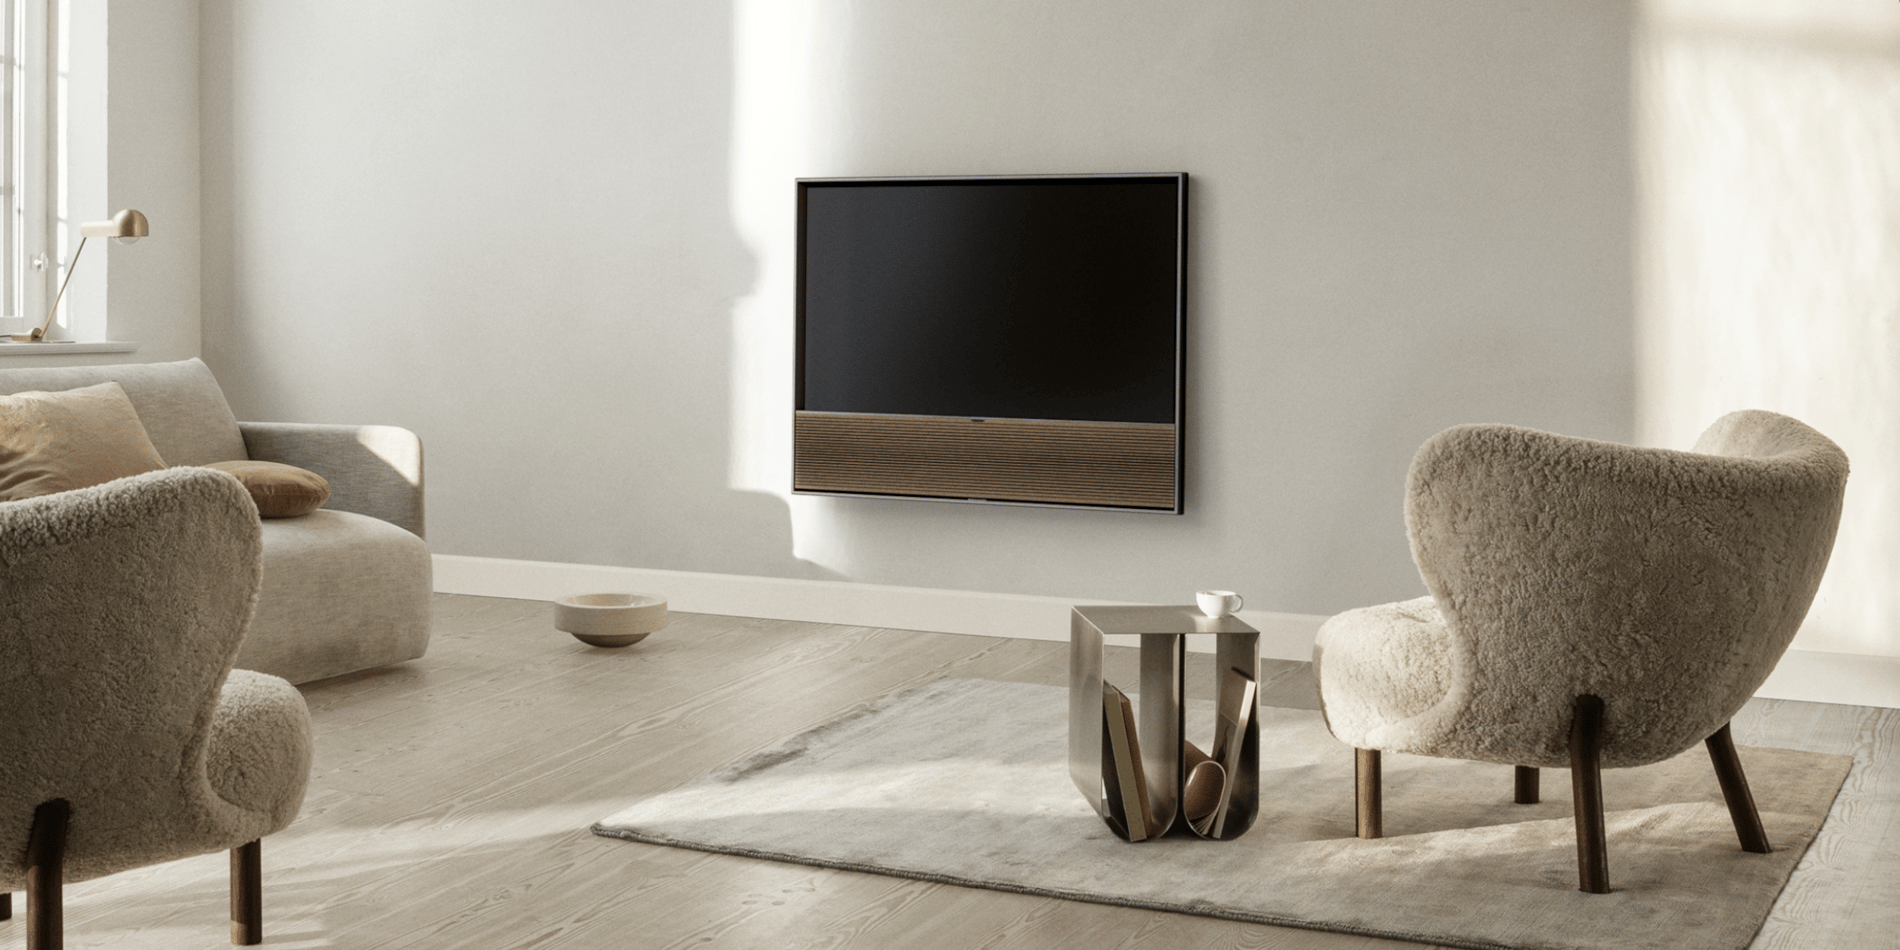 All-in-one OLED TV 48